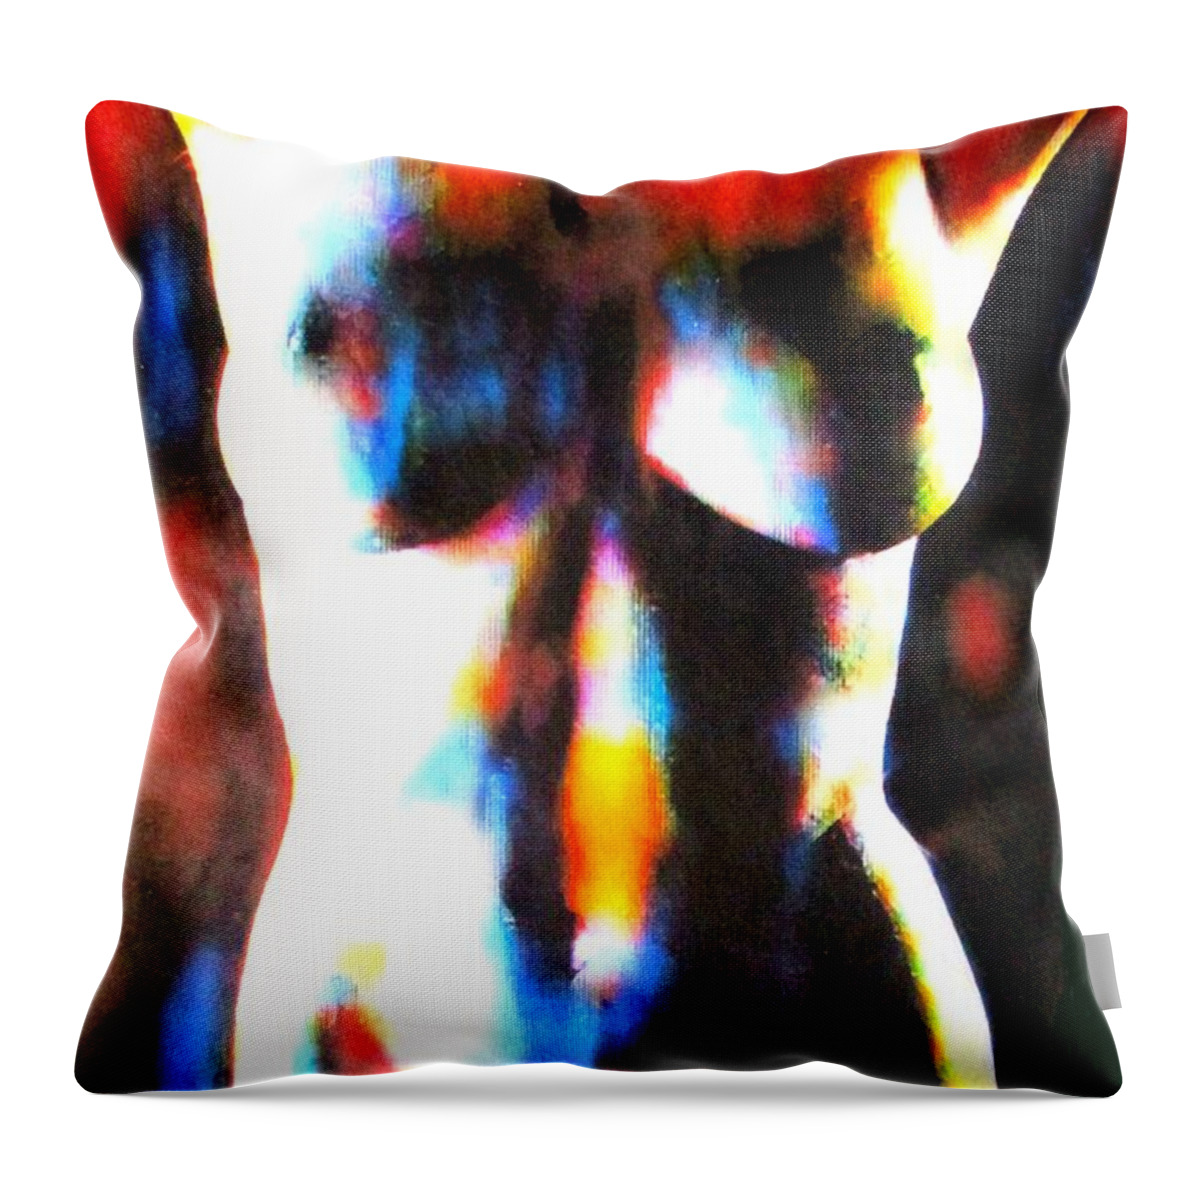 Affordable Original Art Throw Pillow featuring the painting Naked Skin by Helena Wierzbicki